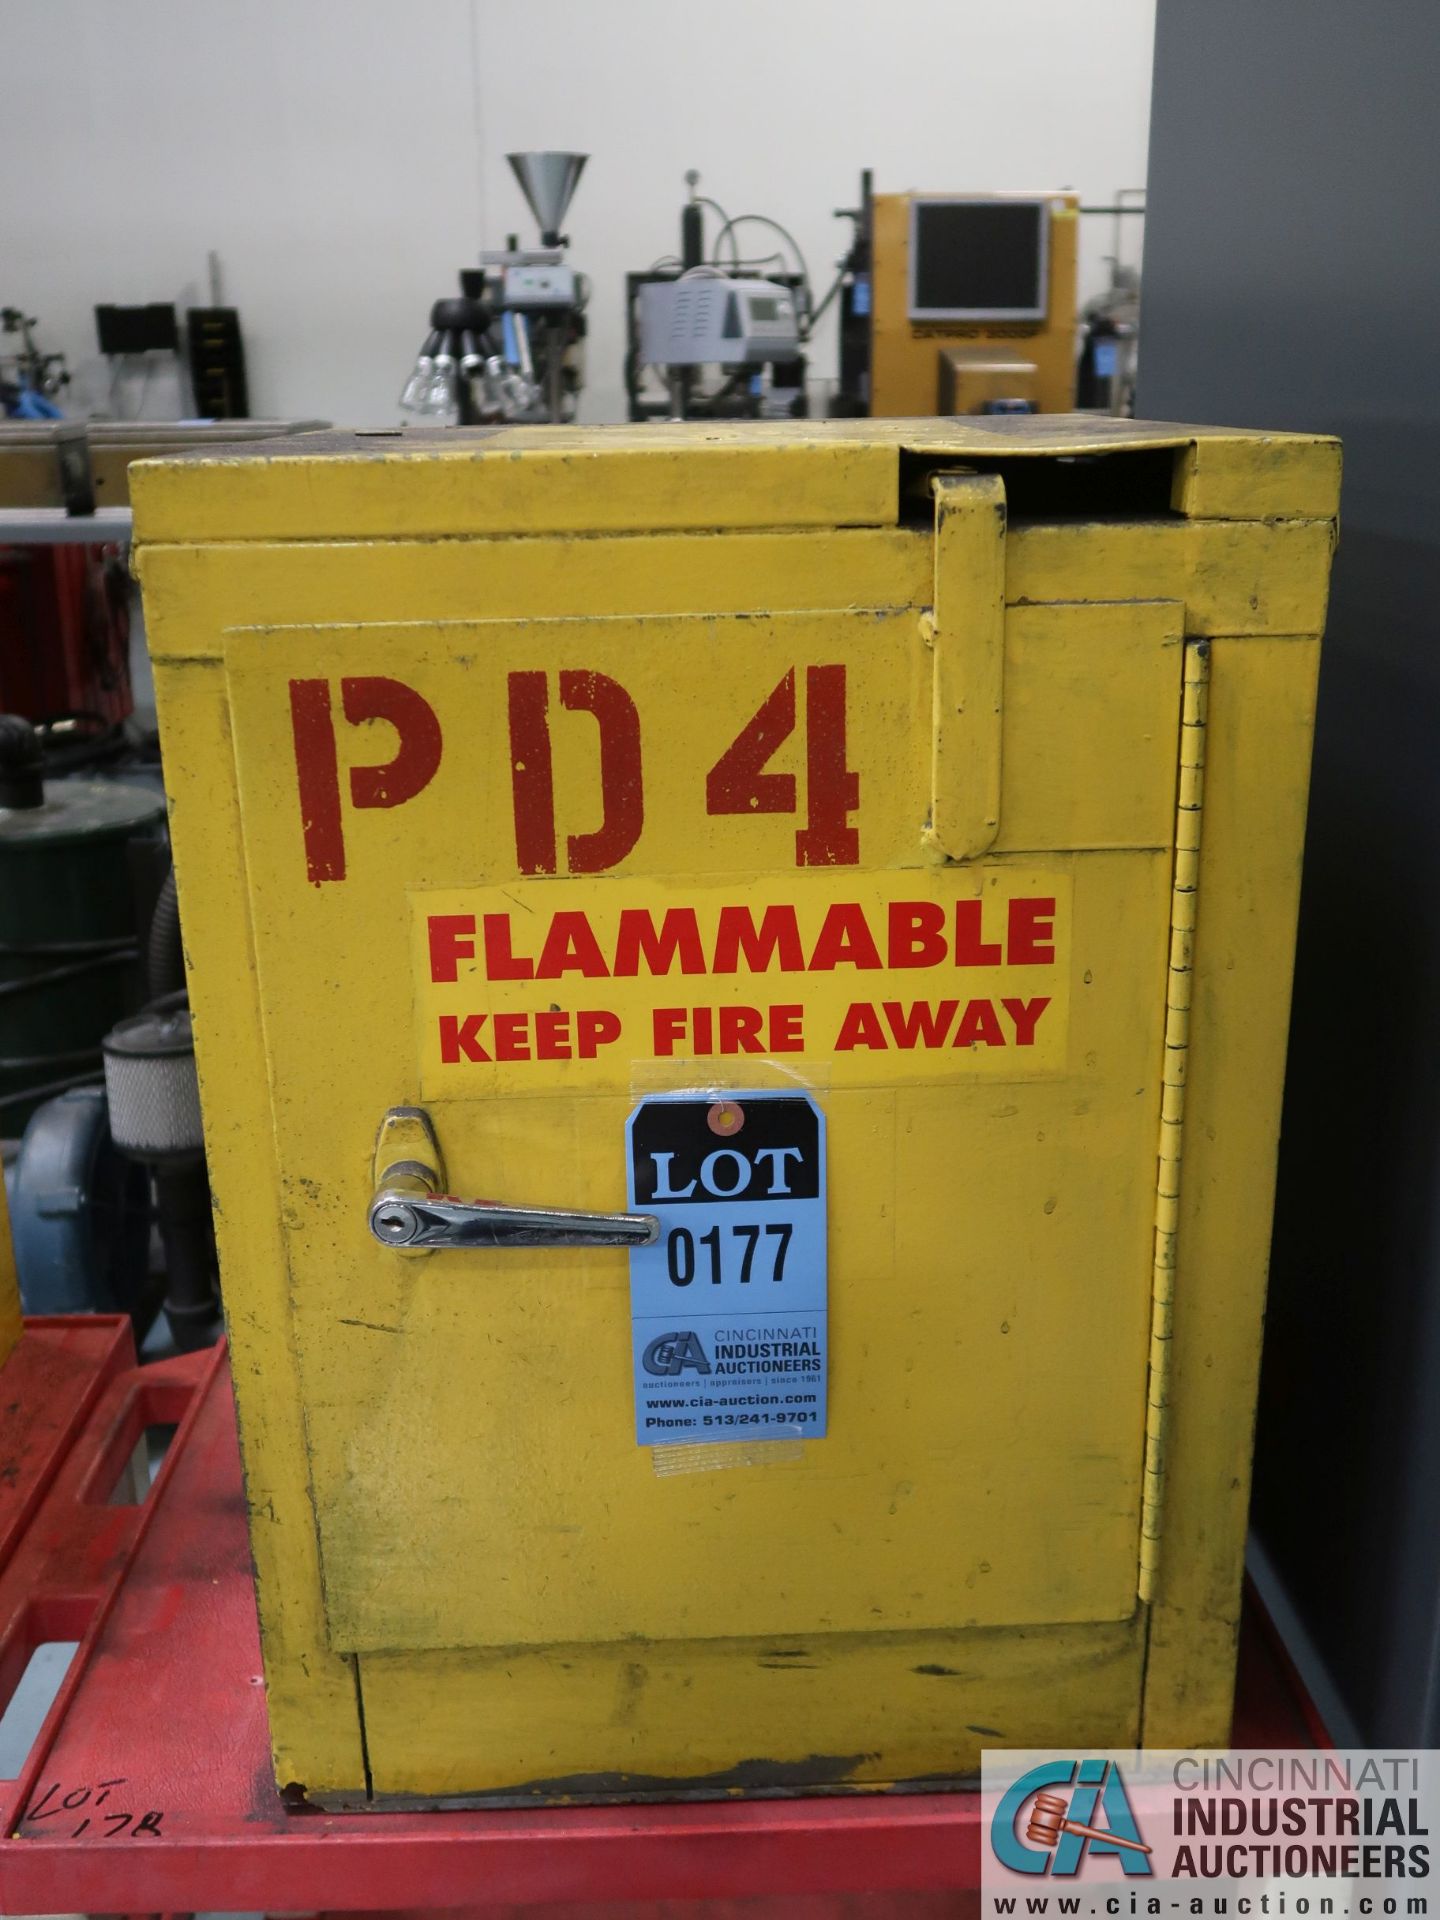 17" X 17" X 23" HIGH FLAMMABLE LIQUID SAFETY STORAGE CABINET